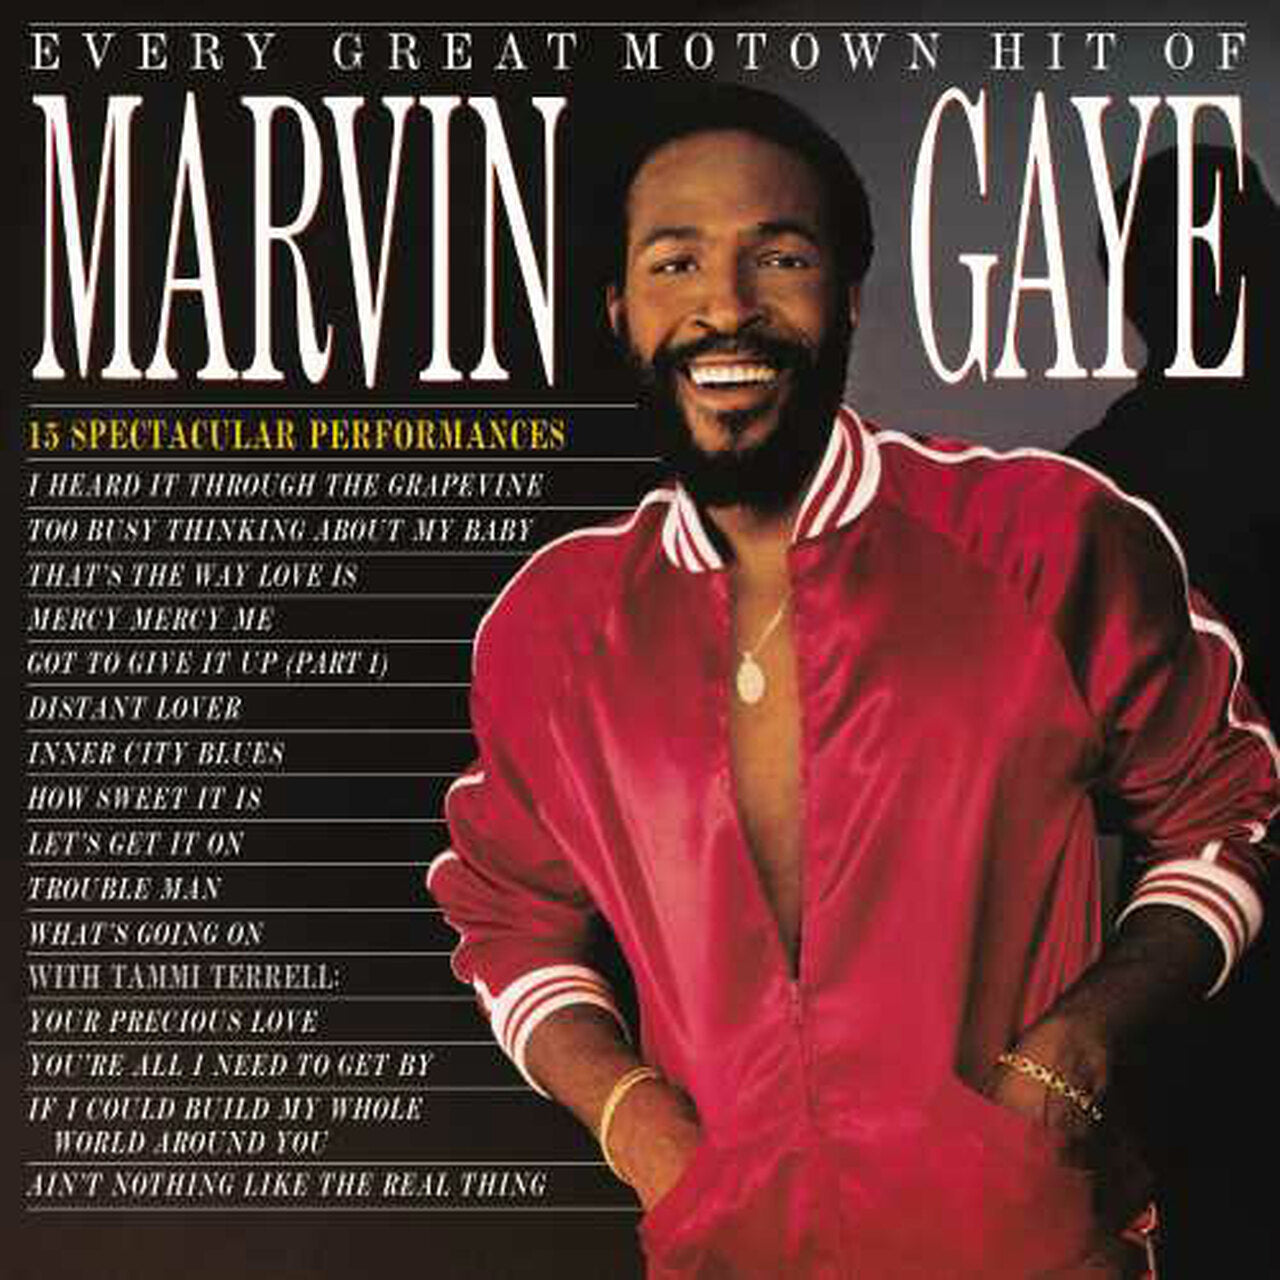 Marvin Gaye - Every Great Motown Hit Of Marvin Gaye: 15 Spectacular Performances